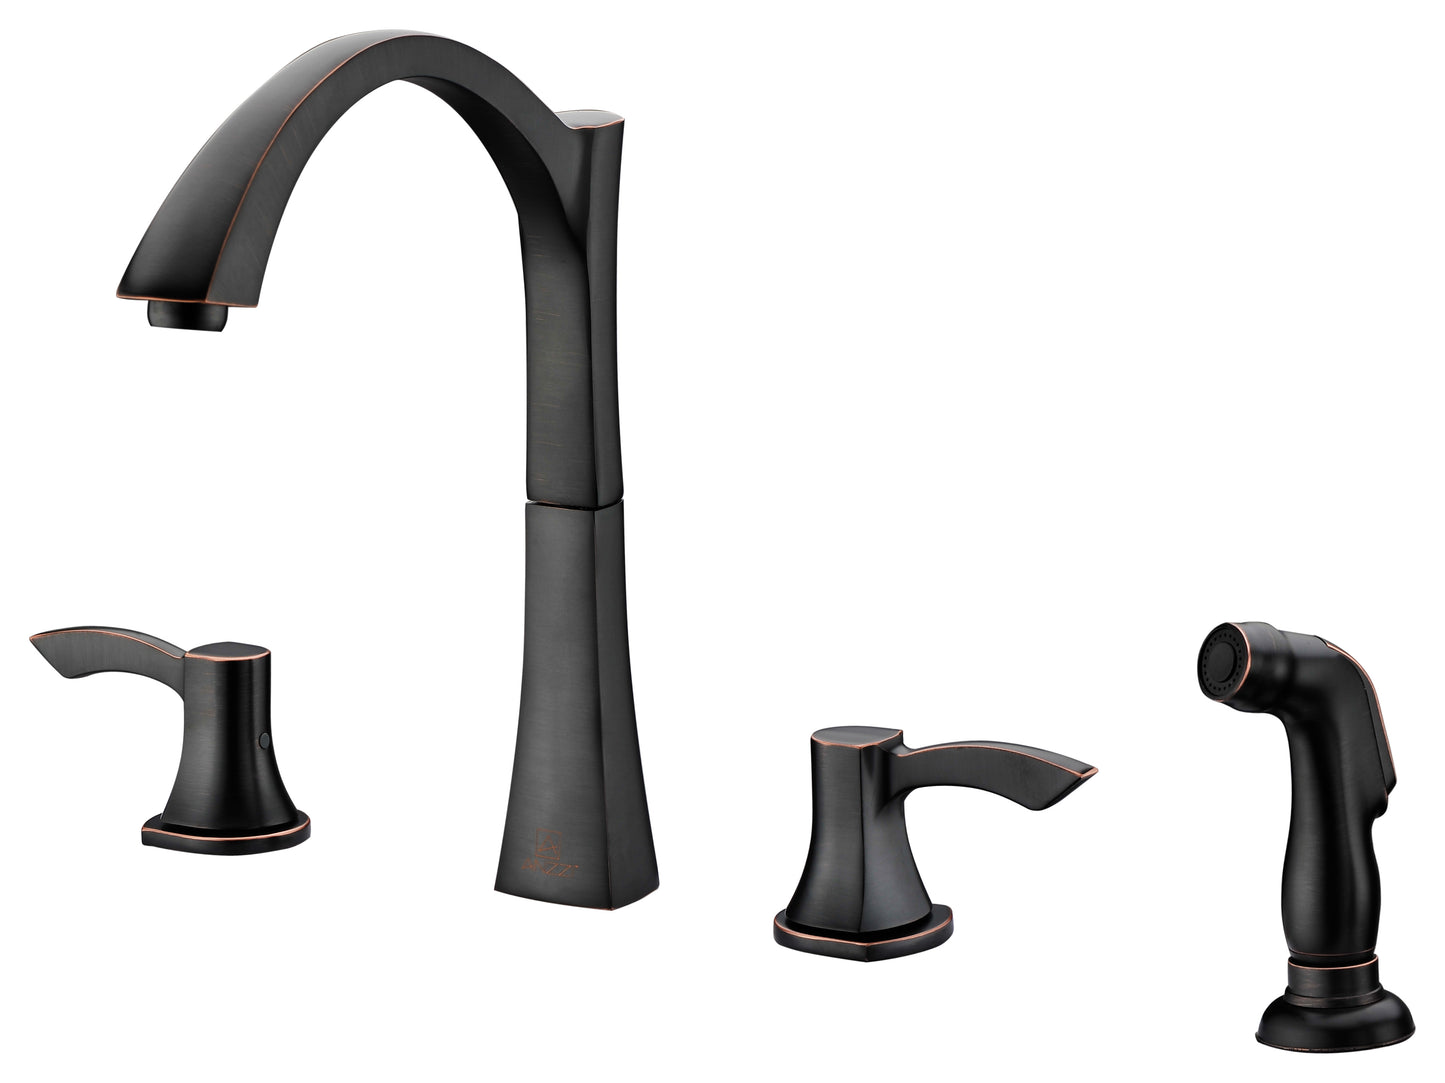 KF-AZ032ORB - Soave Series 2-Handle Standard Kitchen Faucet in Oil Rubbed Bronze